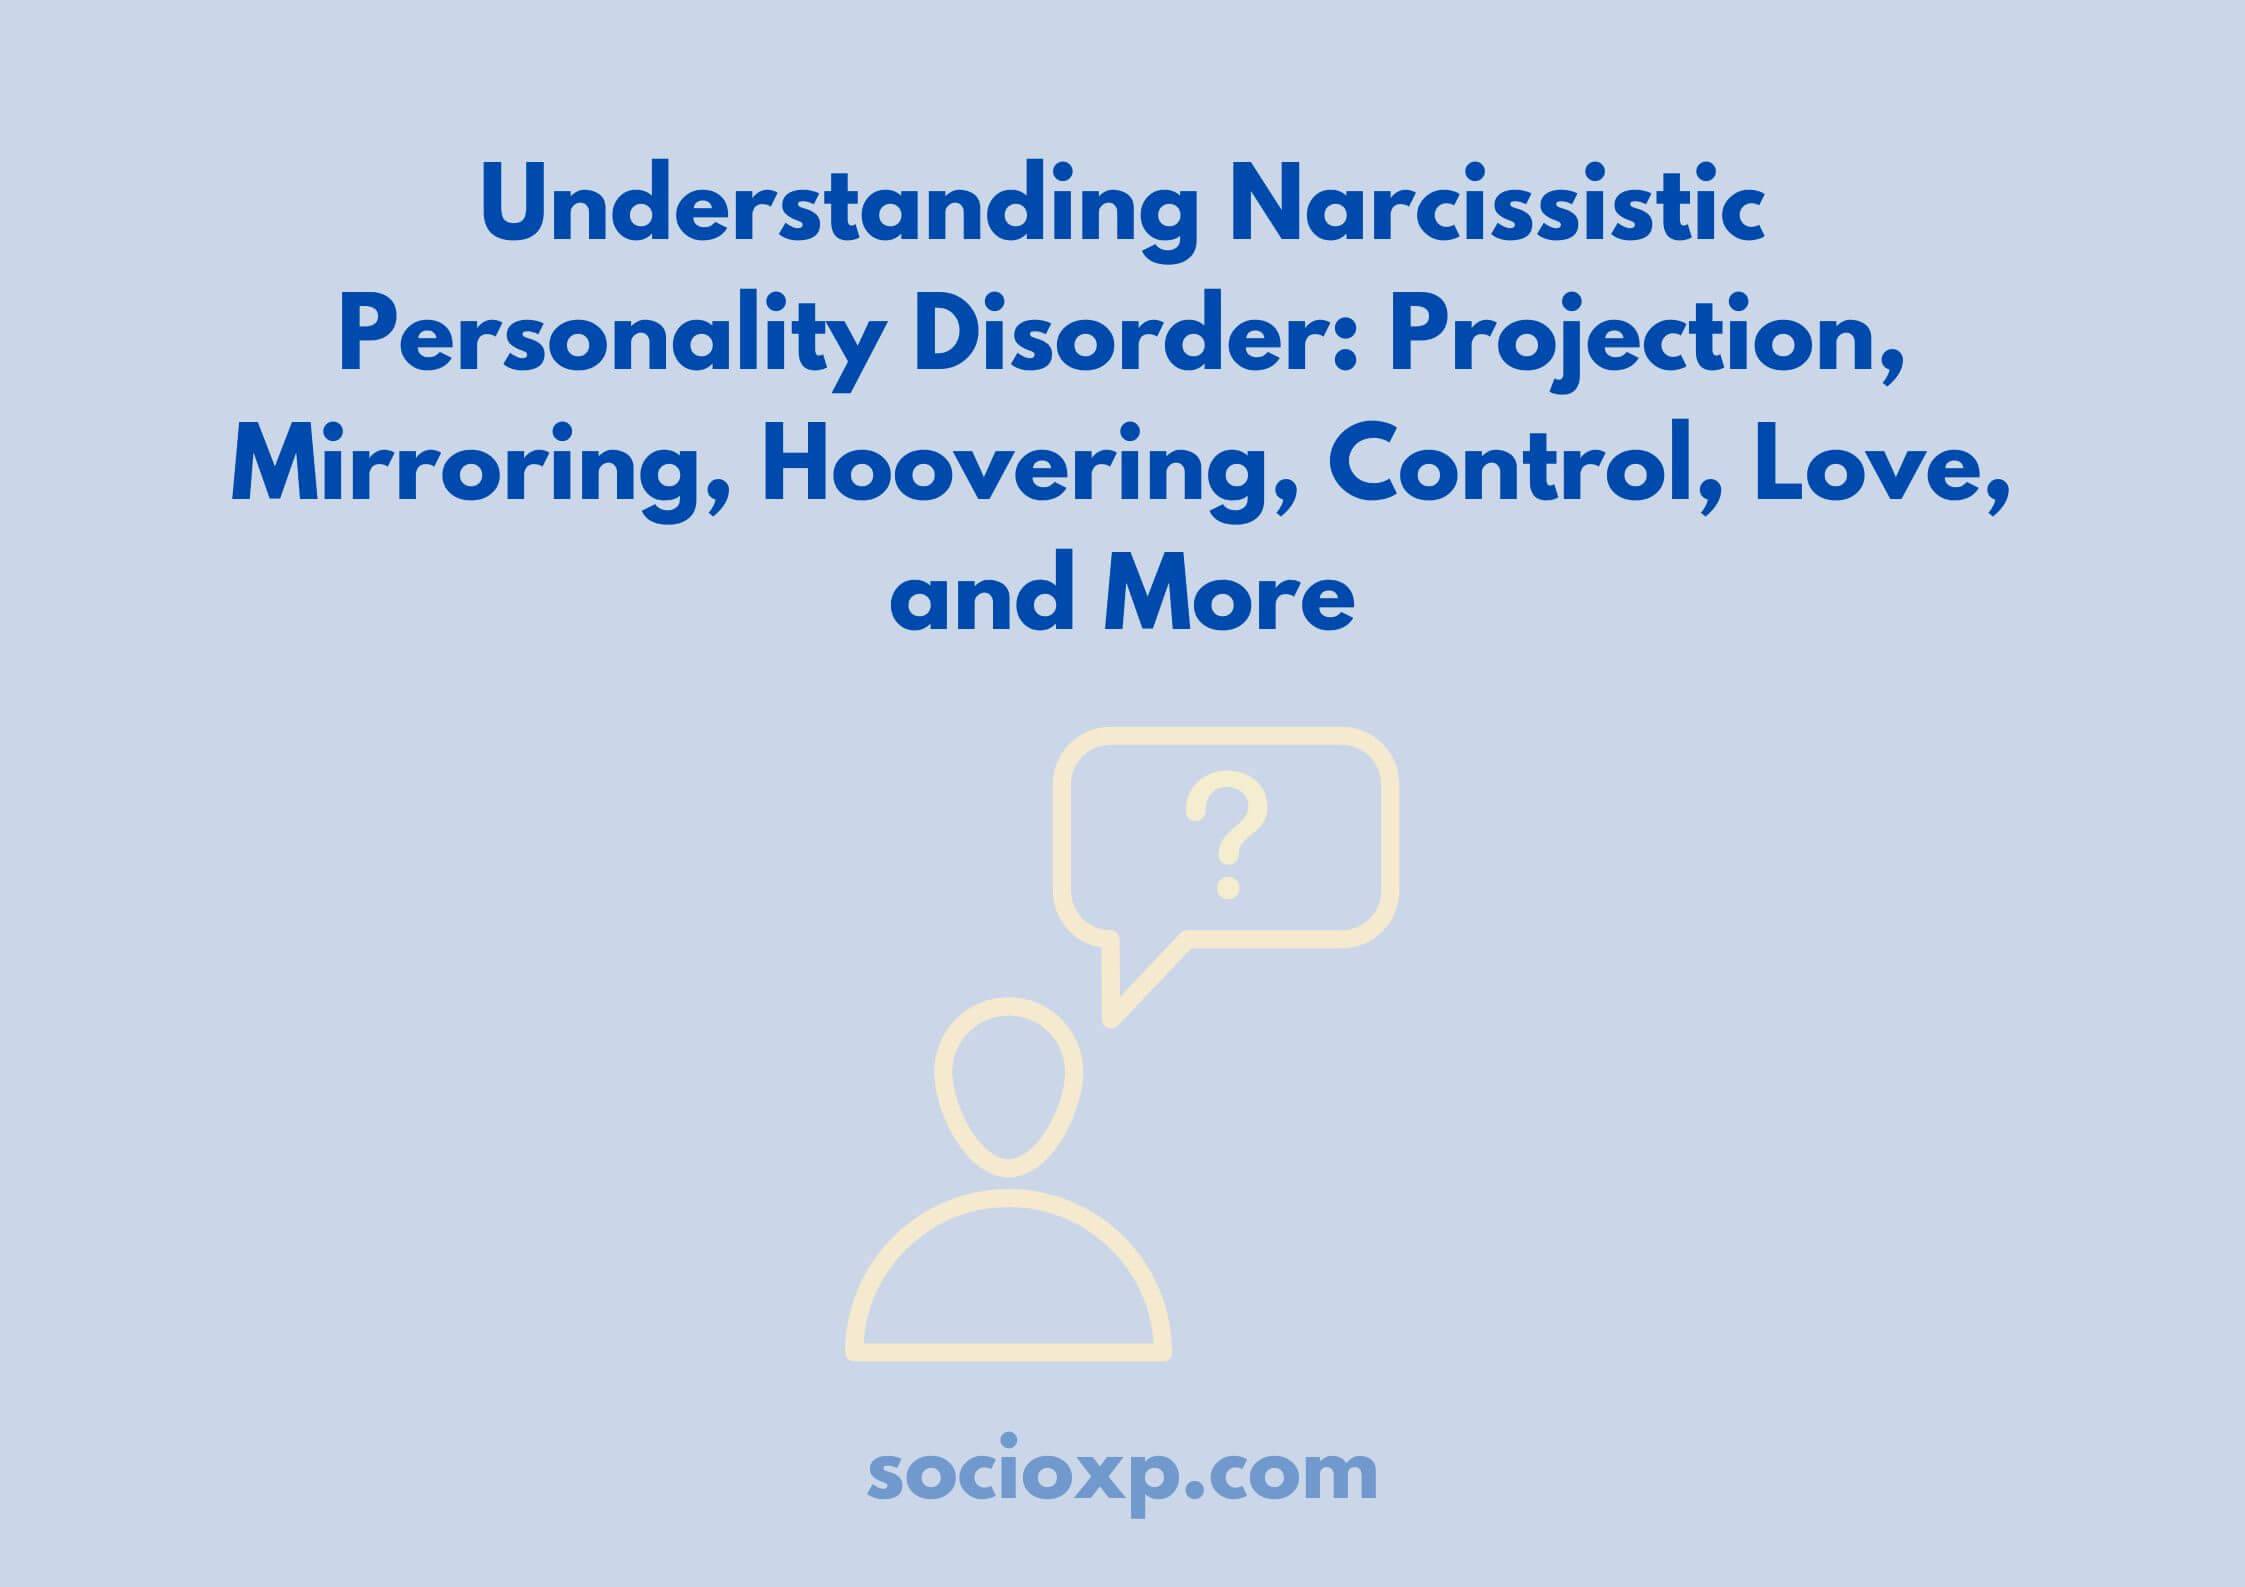 Understanding Narcissistic Personality Disorder: Projection, Mirroring, Hoovering, Control, Love, and More